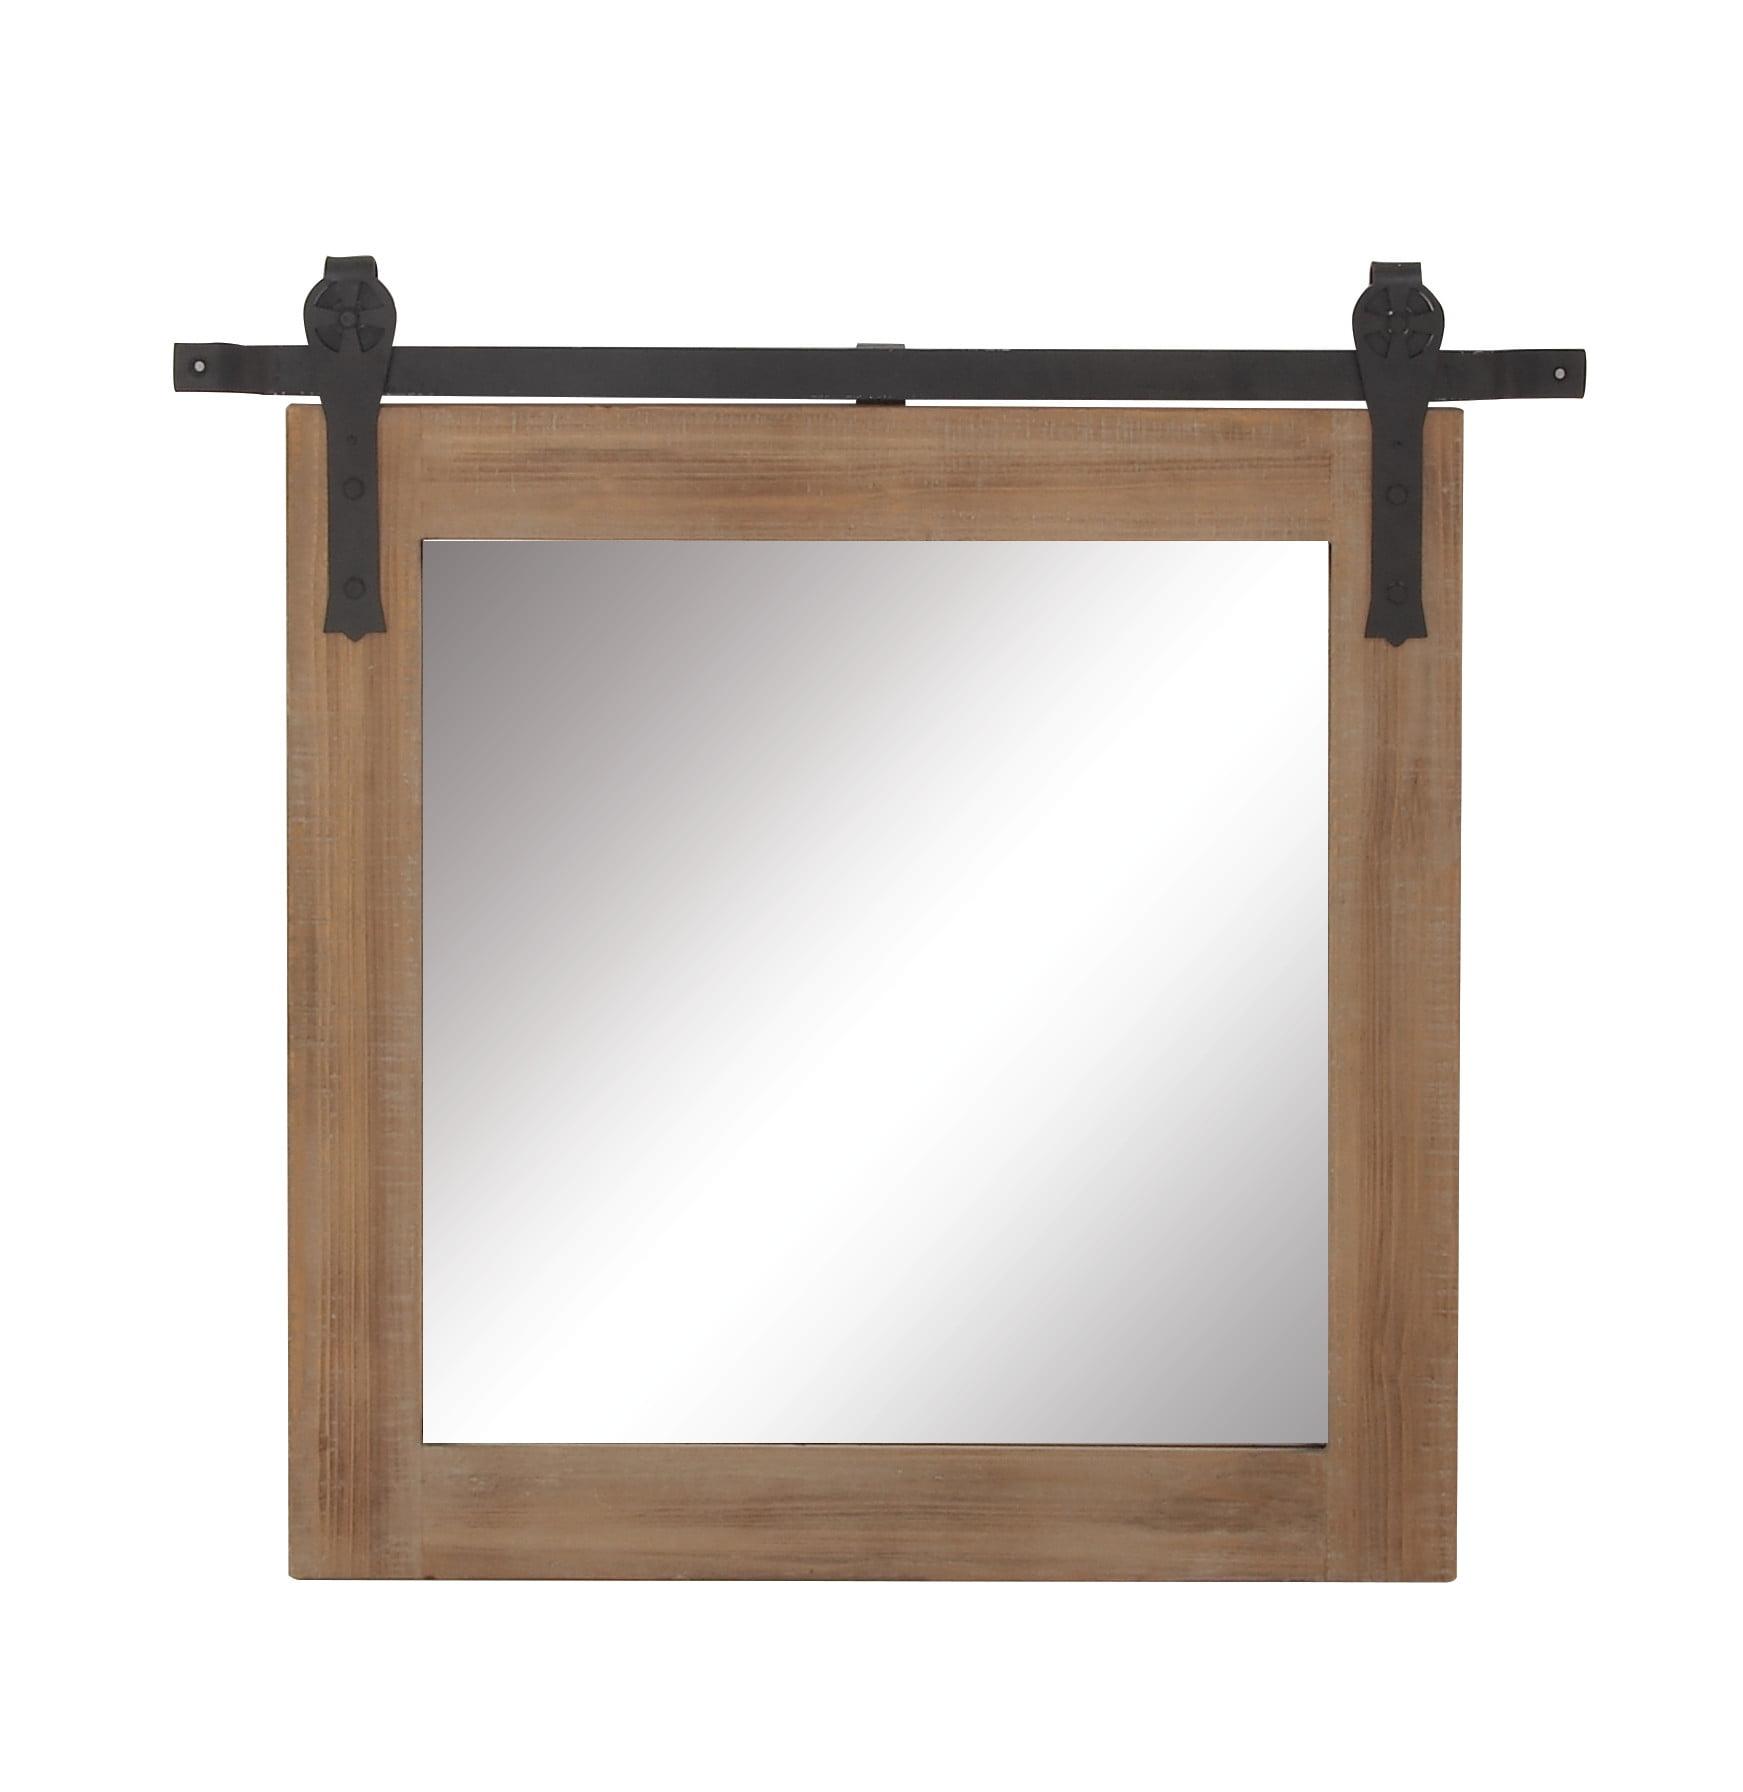 Rustic Industrial Pine Wood Square Wall Mirror, 31" x 31"